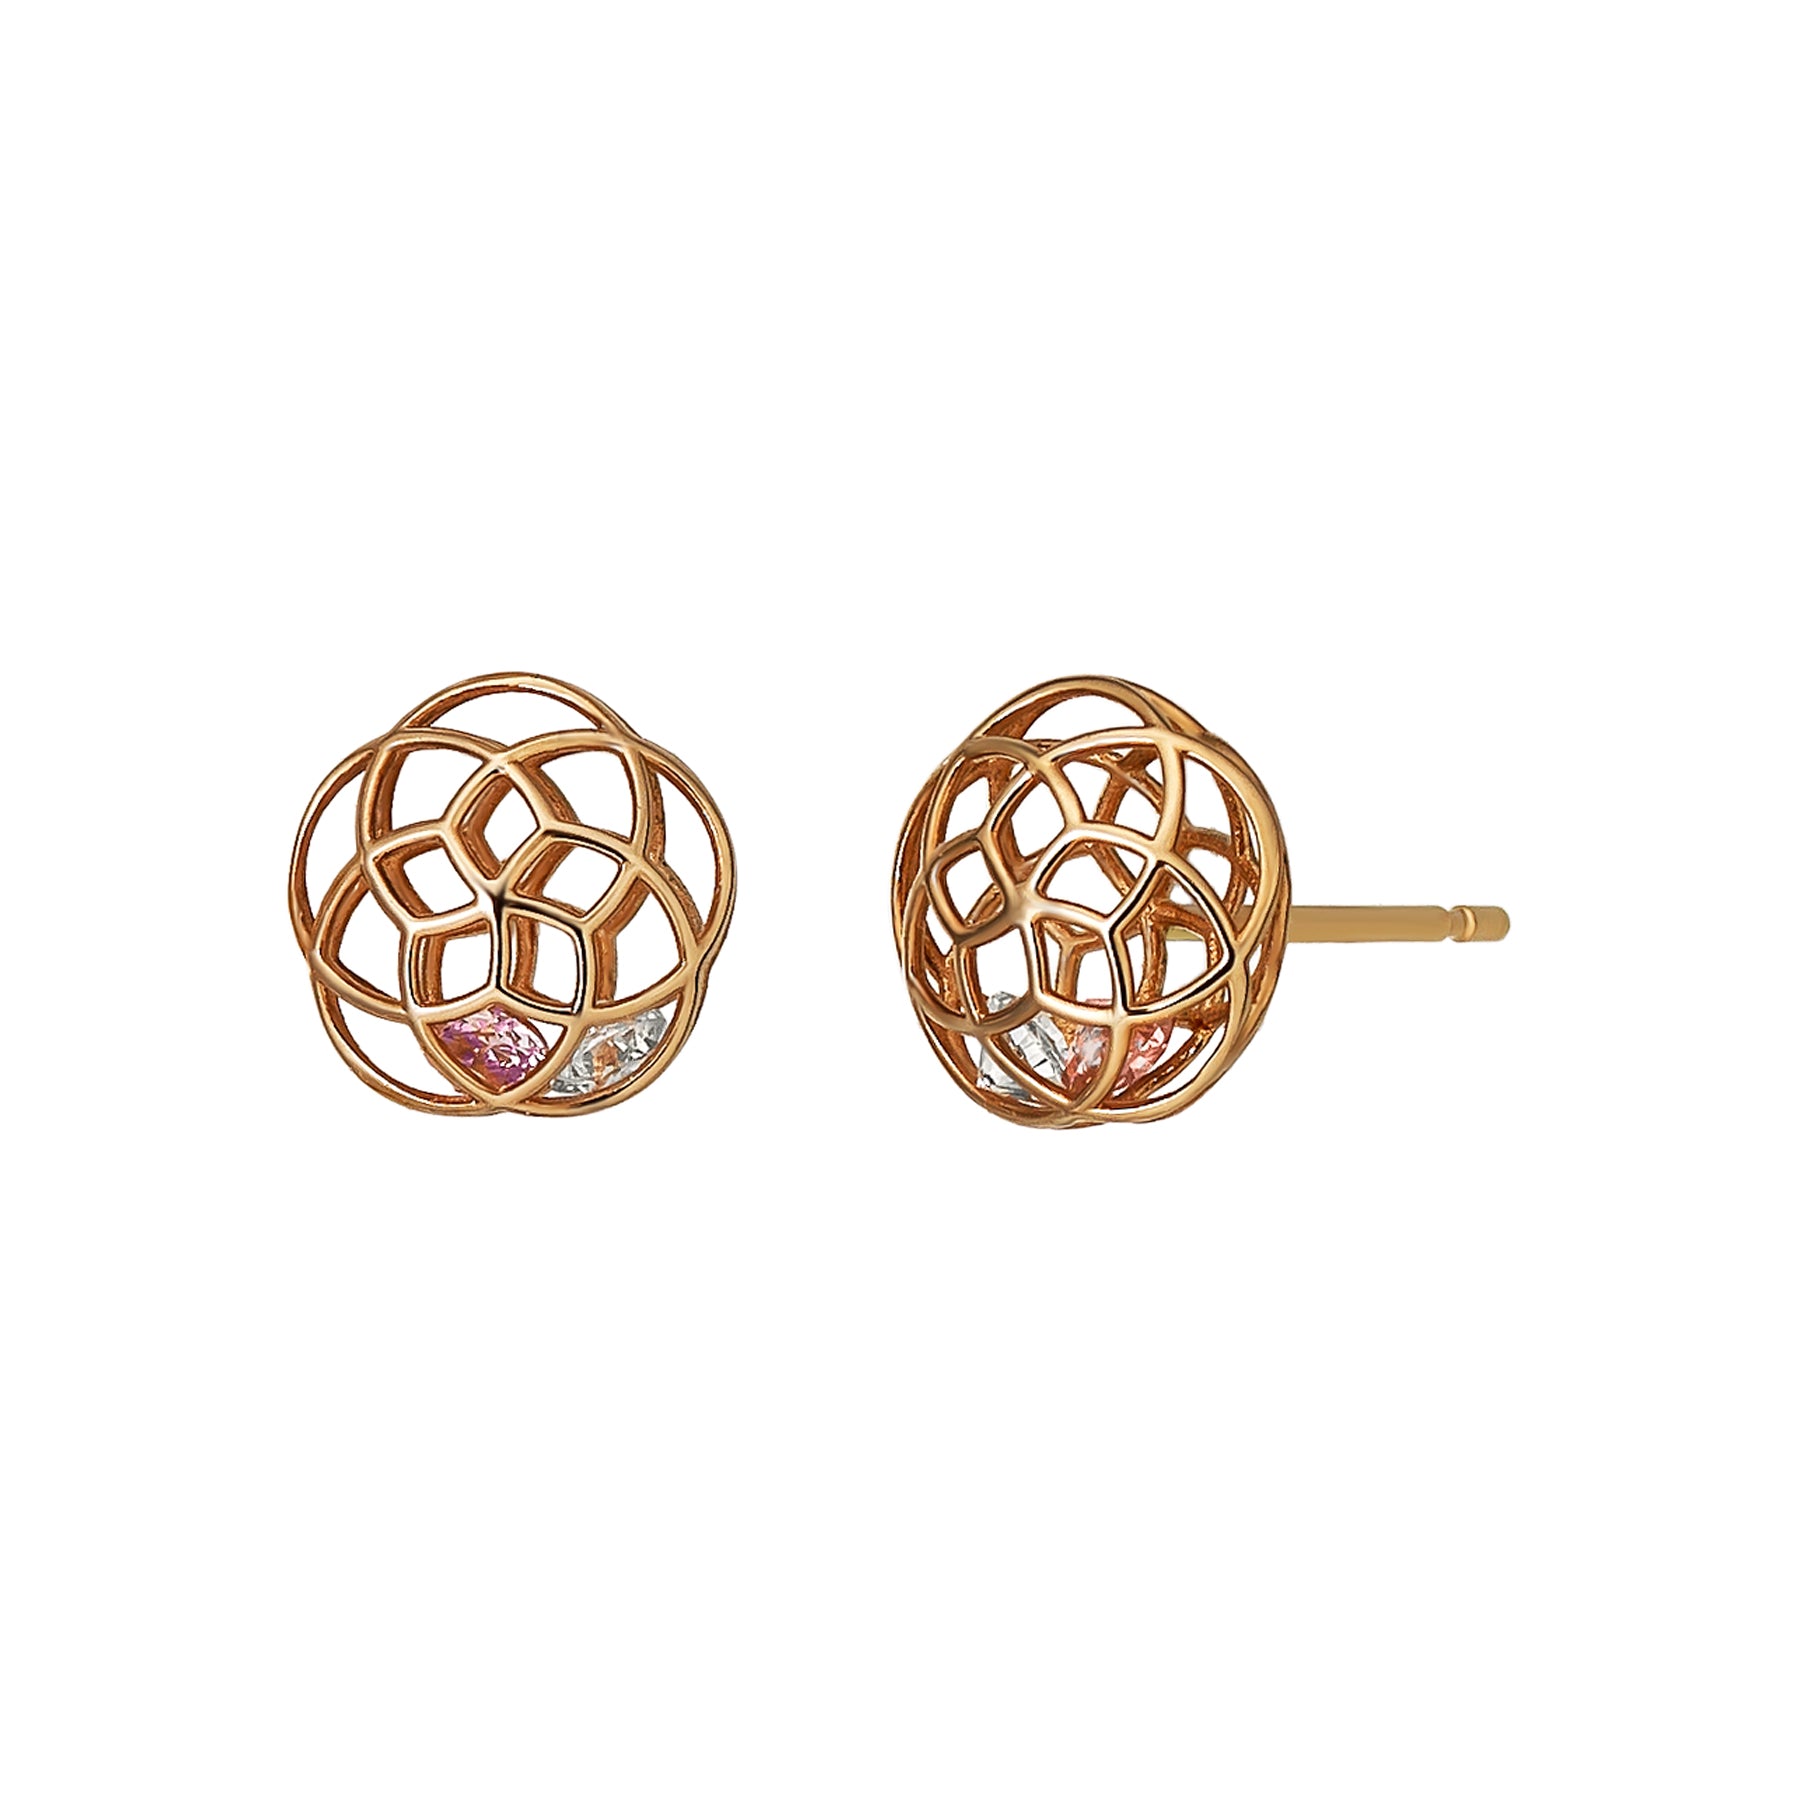 [Pannier] 18K/10K Limited Quantity Earrings “Cherry Blossoms” (Rose Gold) - Product Image